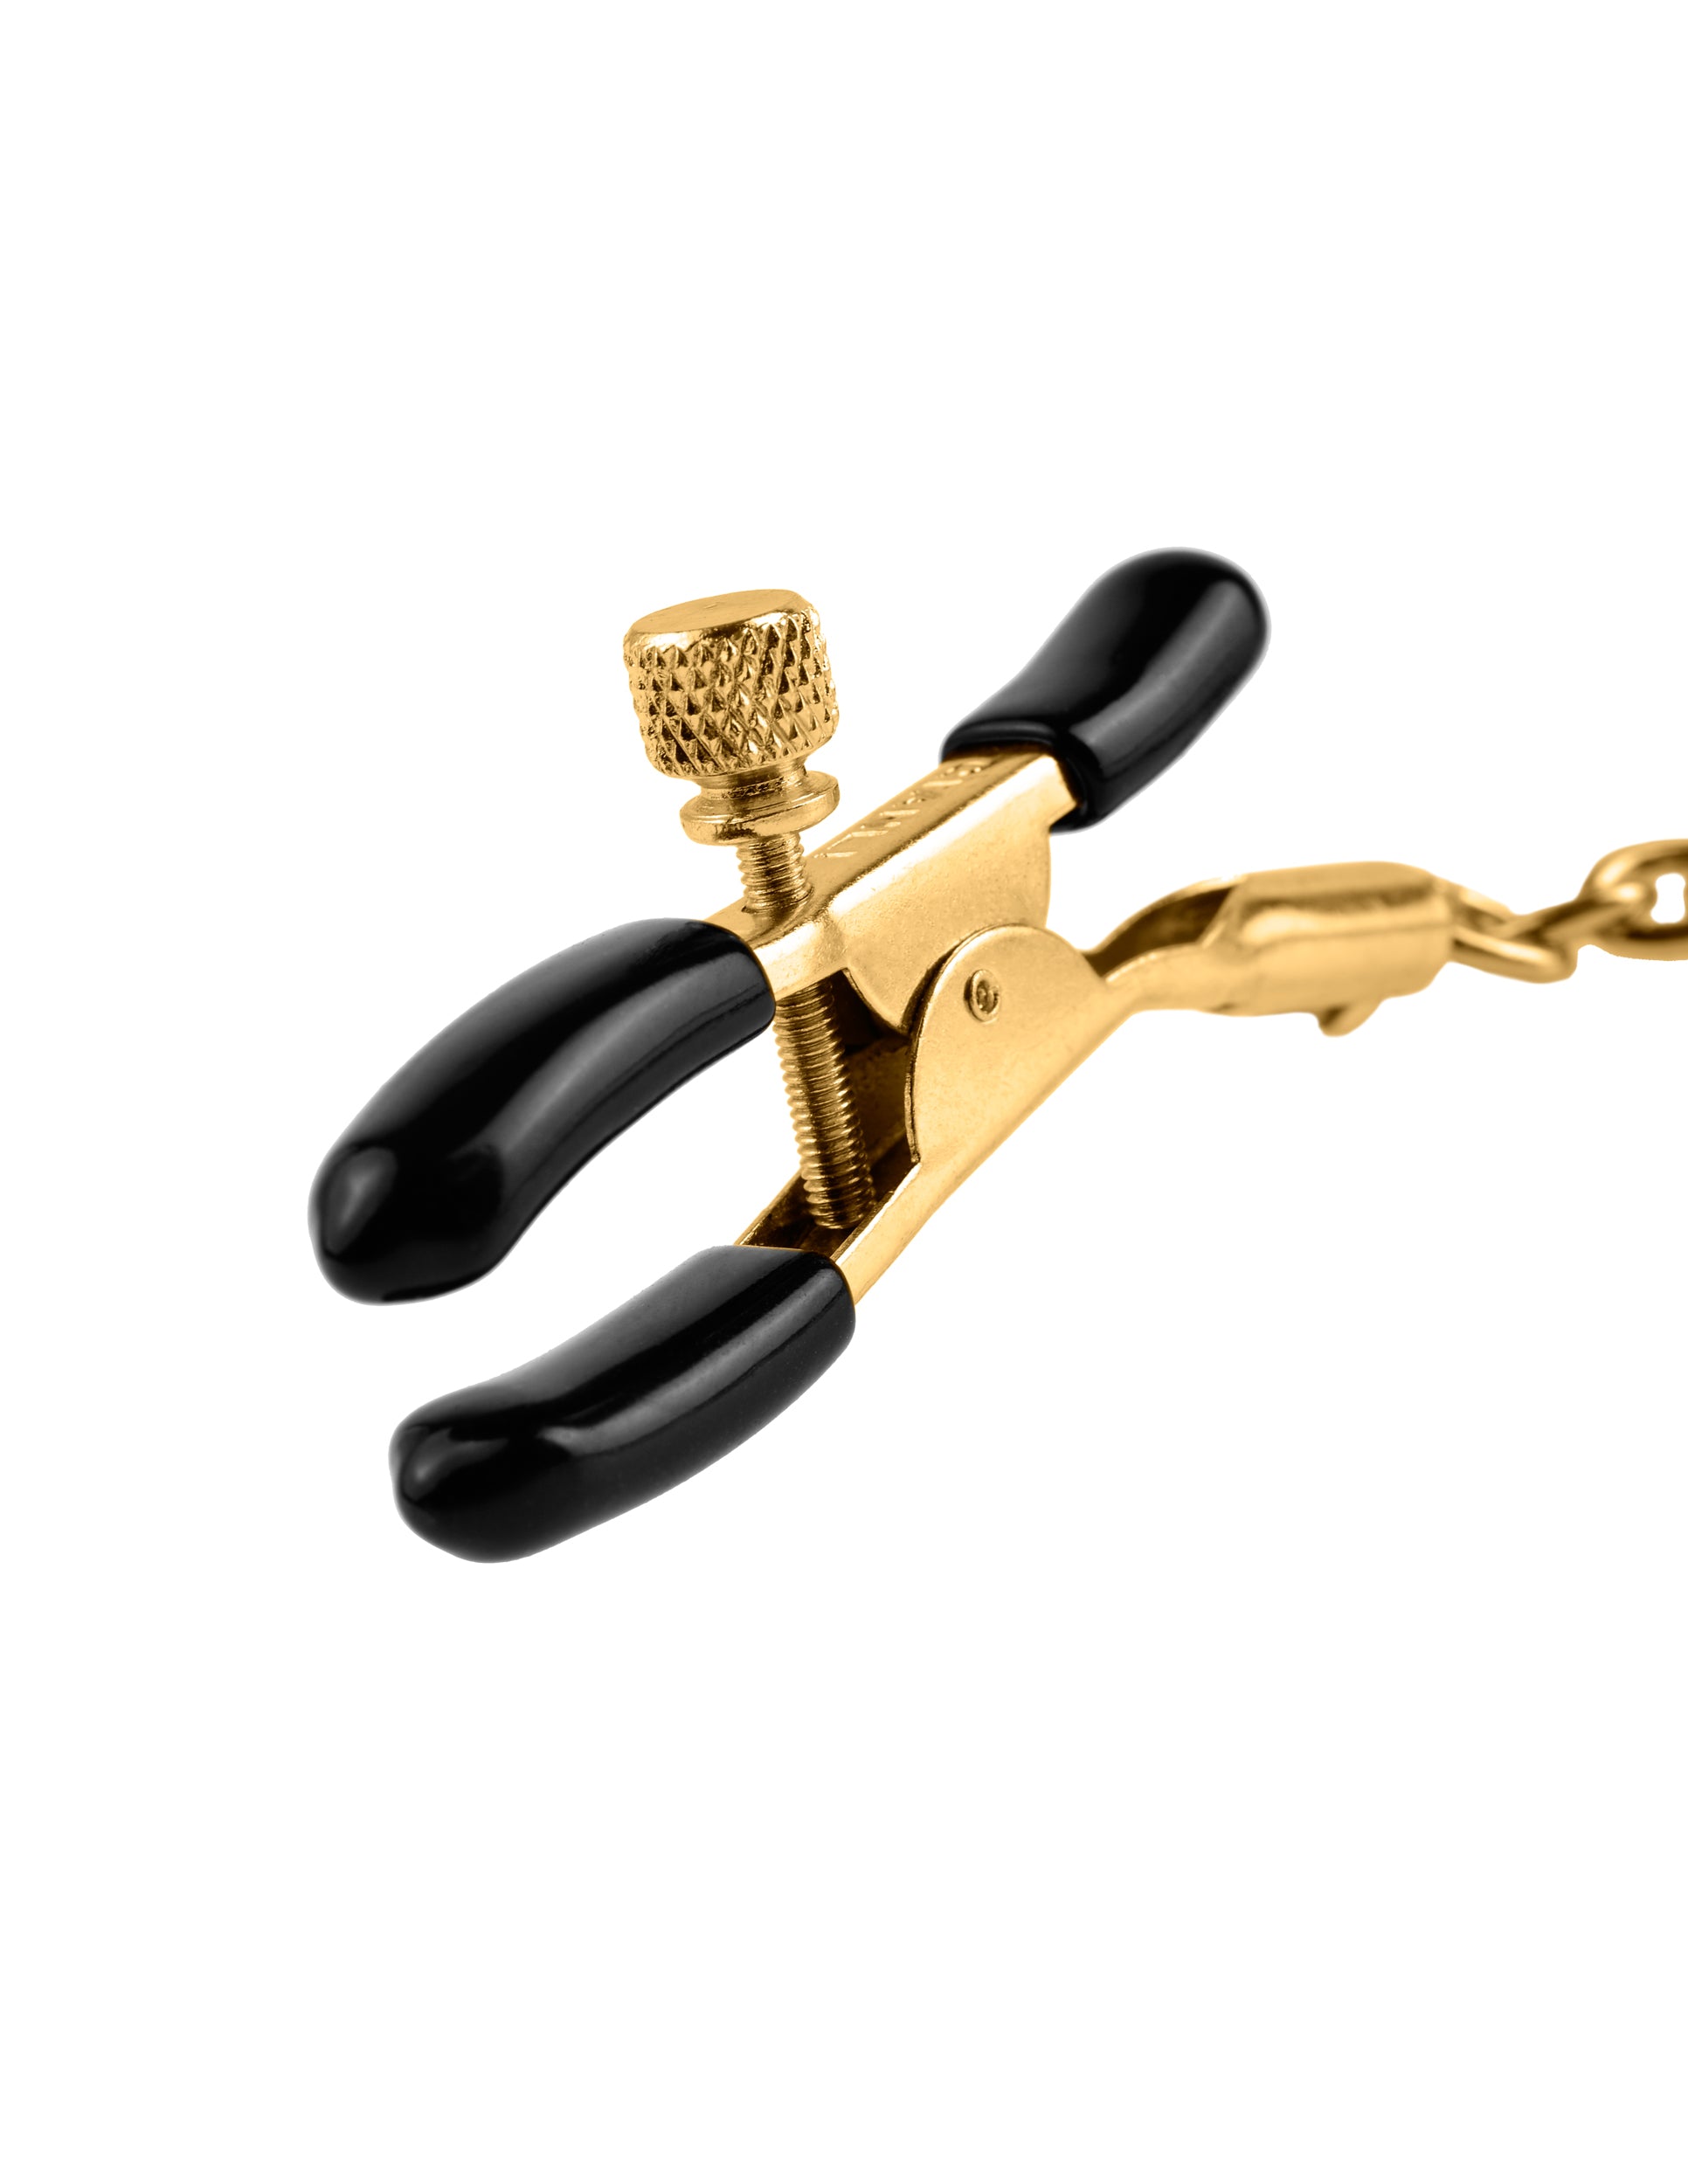 Fetish Fantasy Gold Nipple Chain Clamps